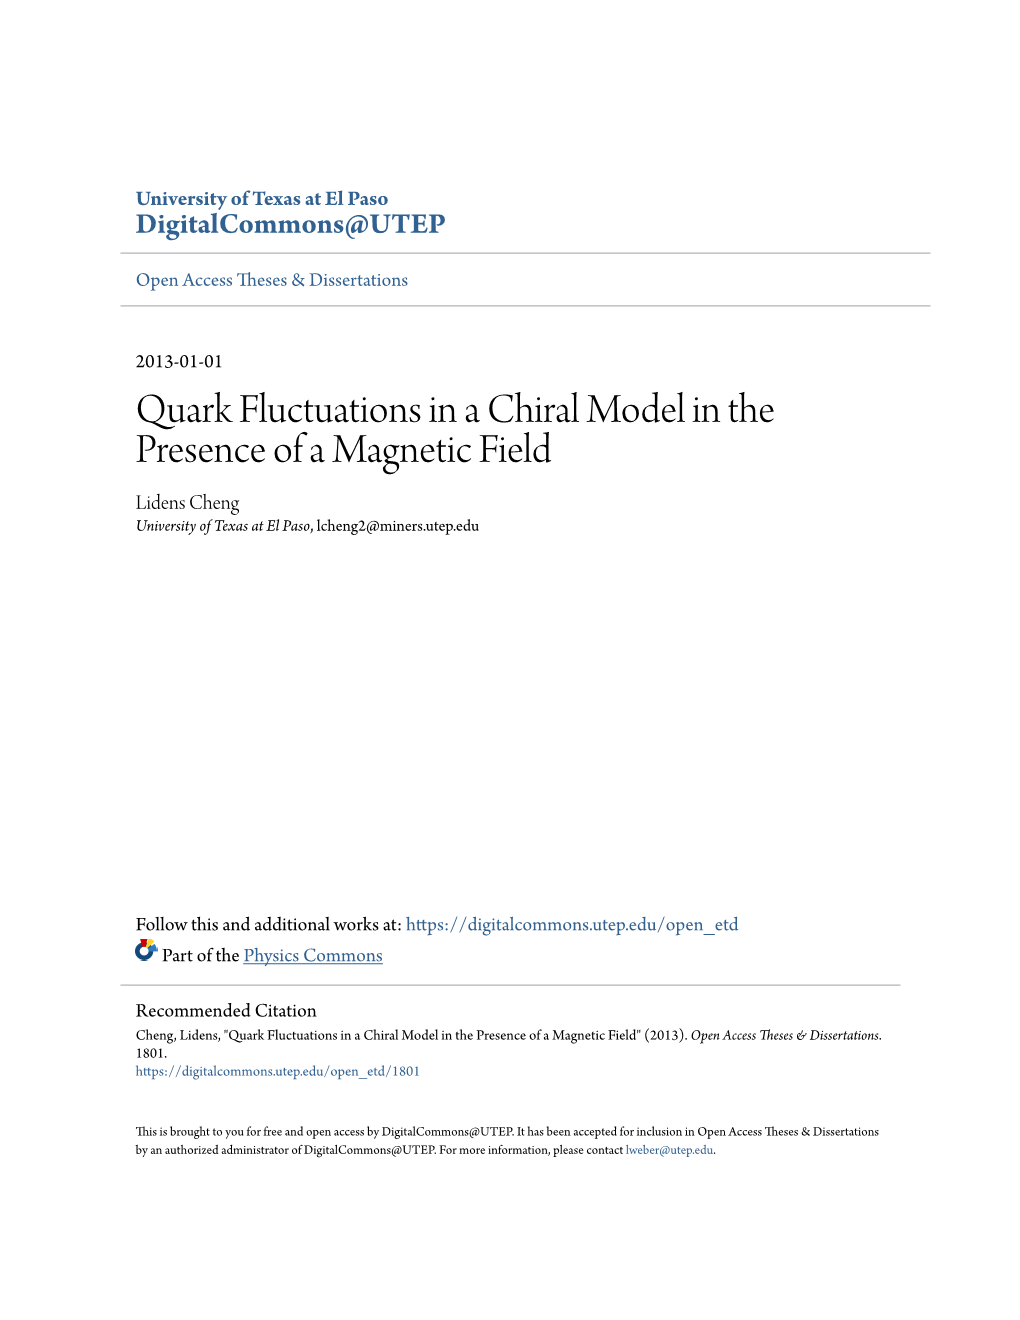 Quark Fluctuations in a Chiral Model in the Presence of a Magnetic Field Lidens Cheng University of Texas at El Paso, Lcheng2@Miners.Utep.Edu